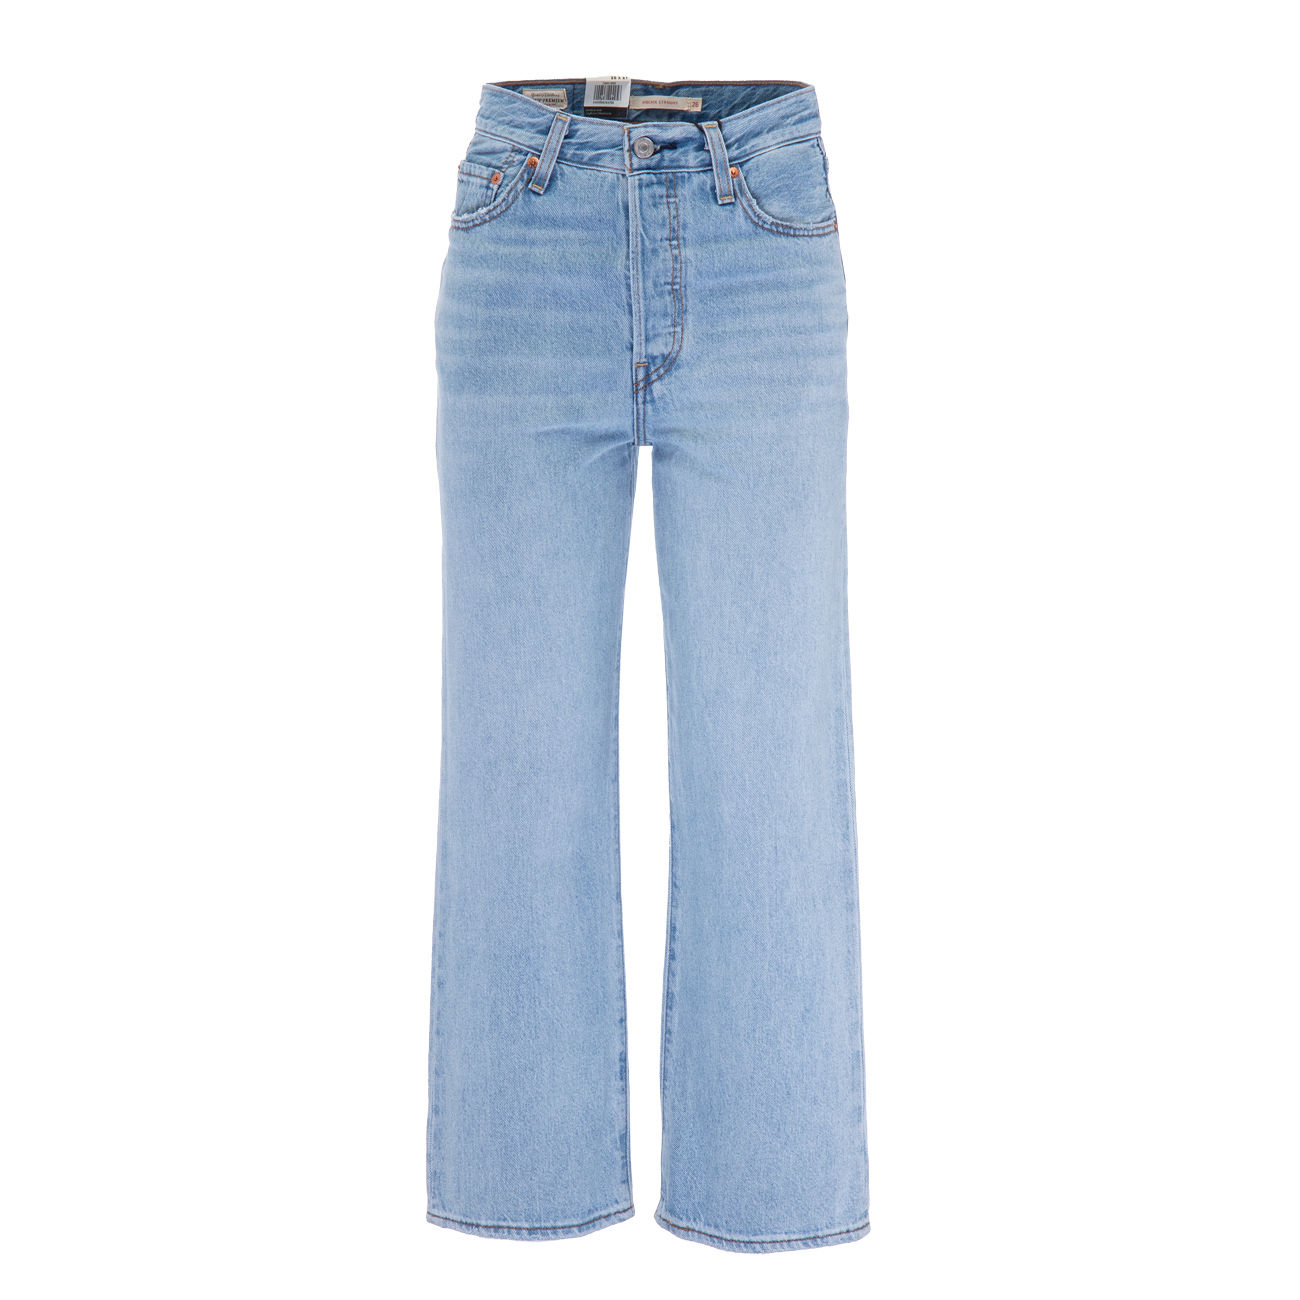 LEVIS RIBCAGE STRAIGHT ANKLE JEANS Woman Middle road | Mascheroni Store